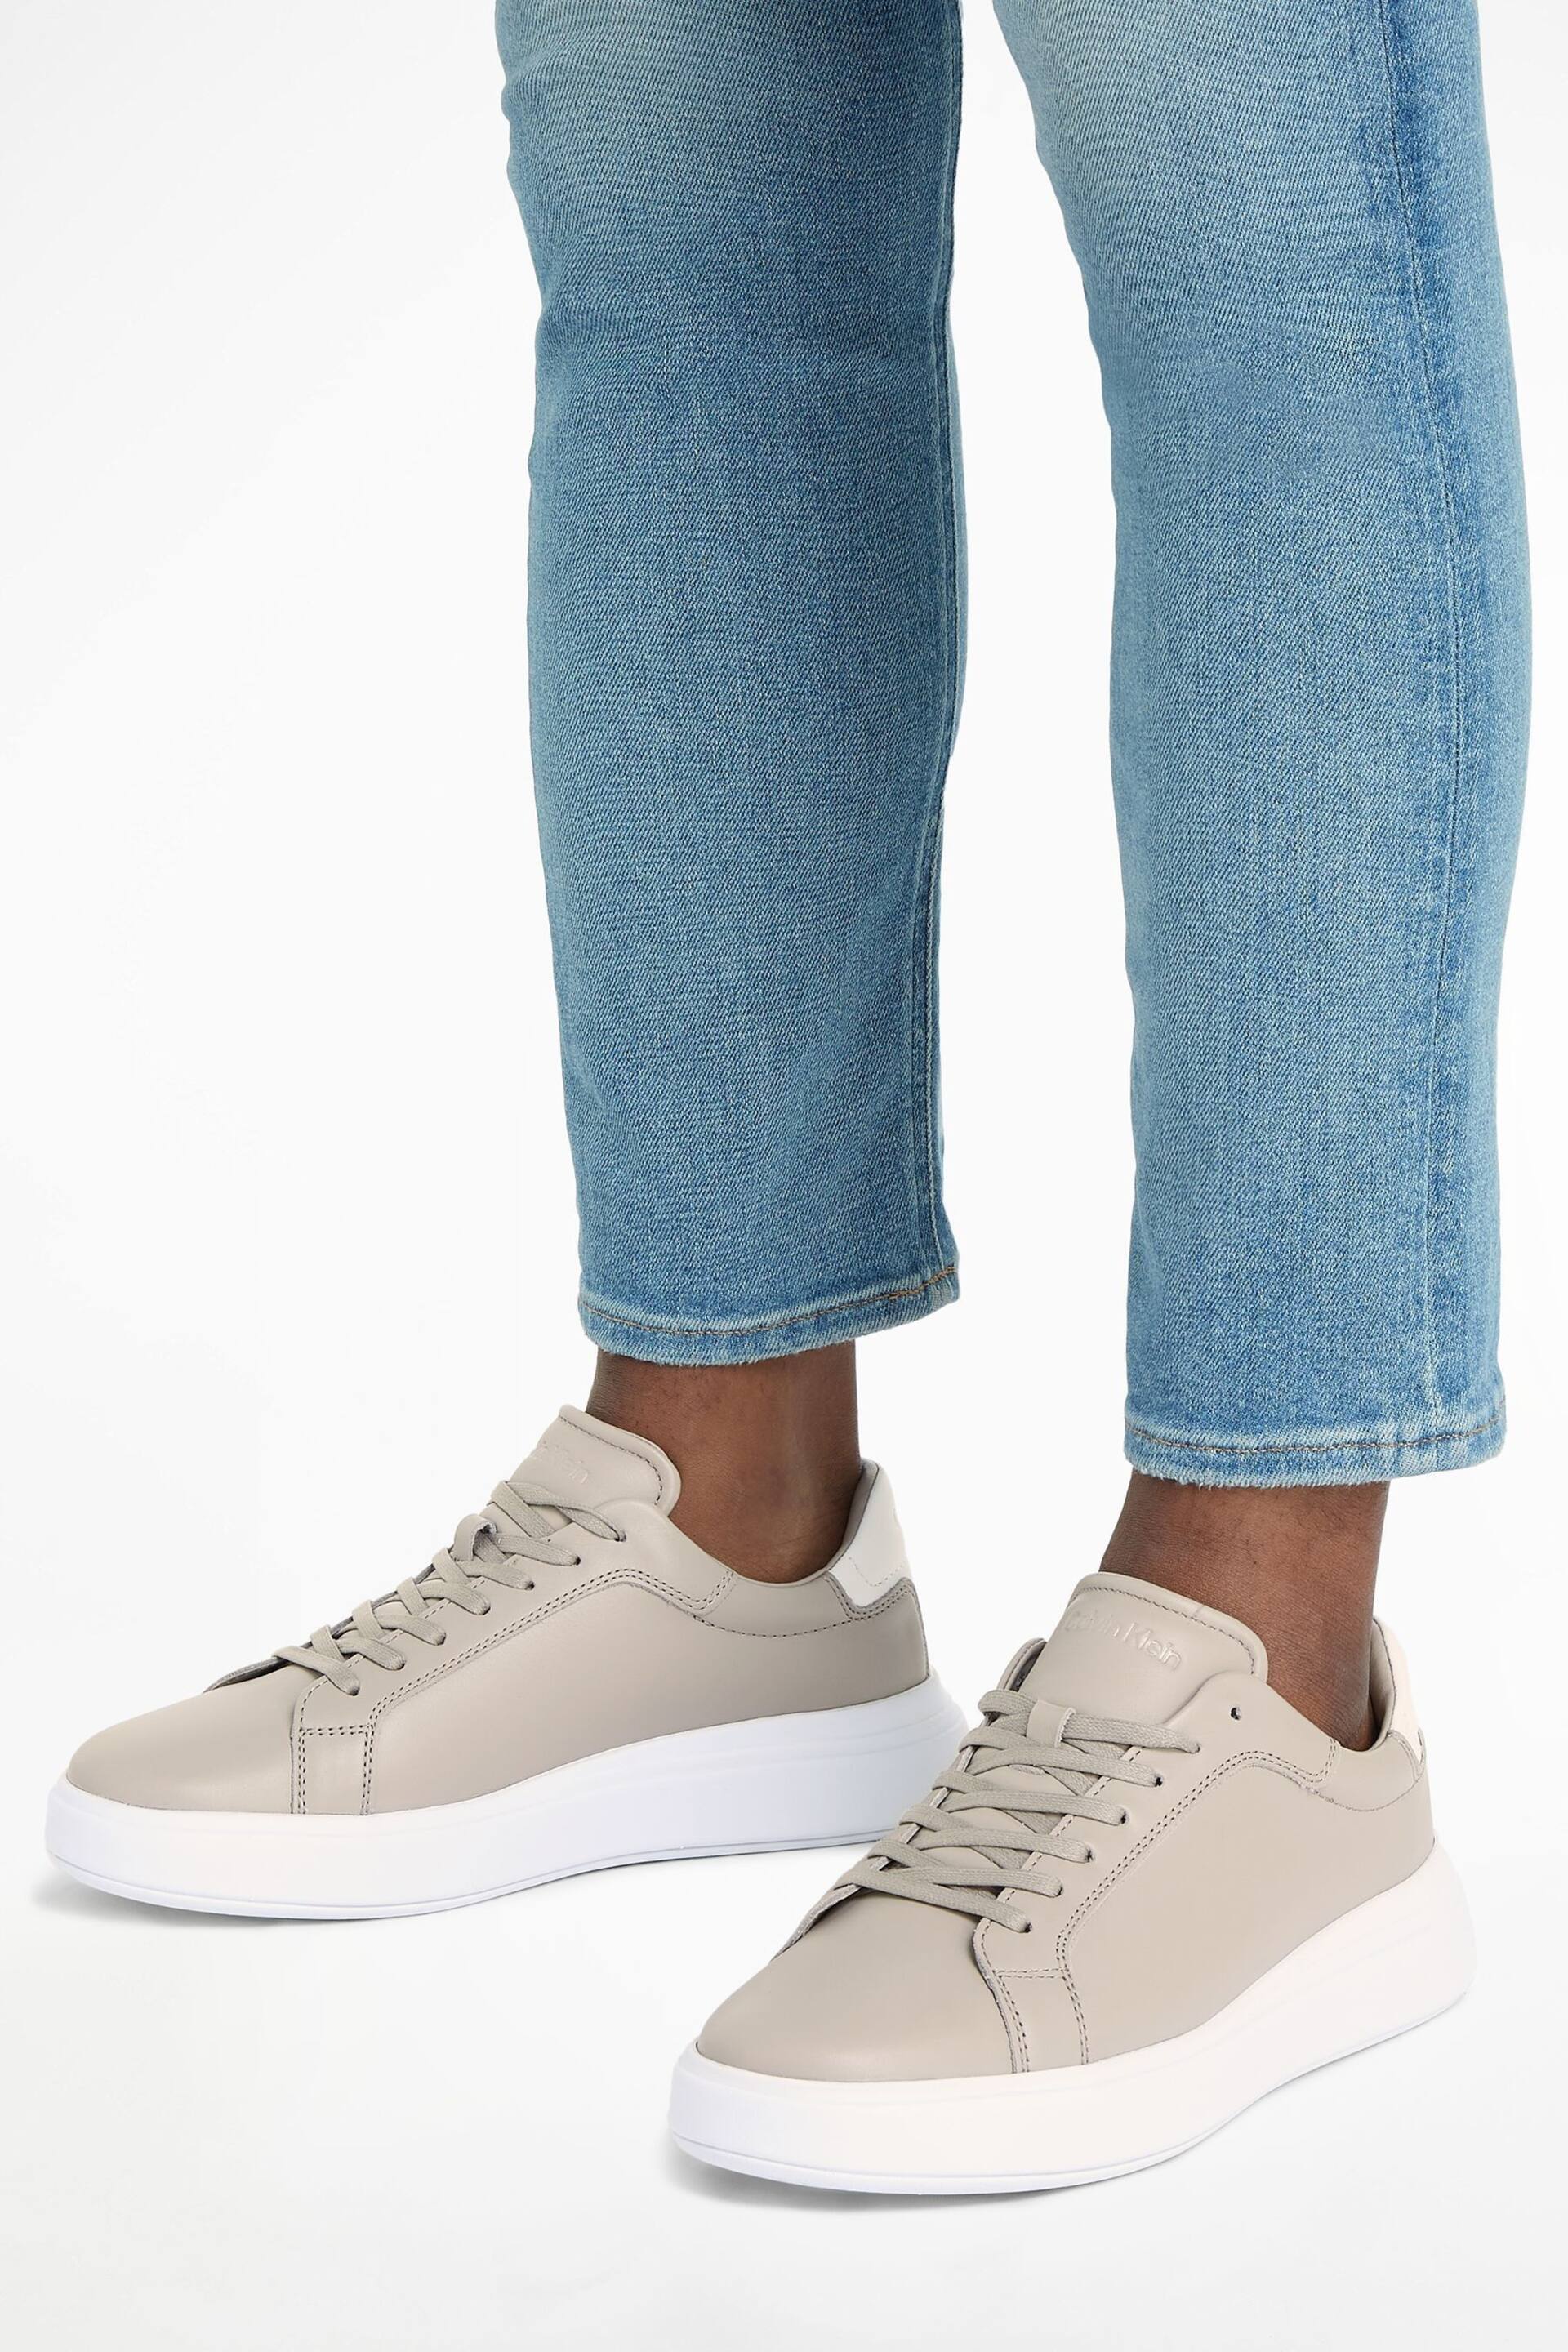 Calvin Klein Nude Low Top Lace-Up Sneakers - Image 4 of 4